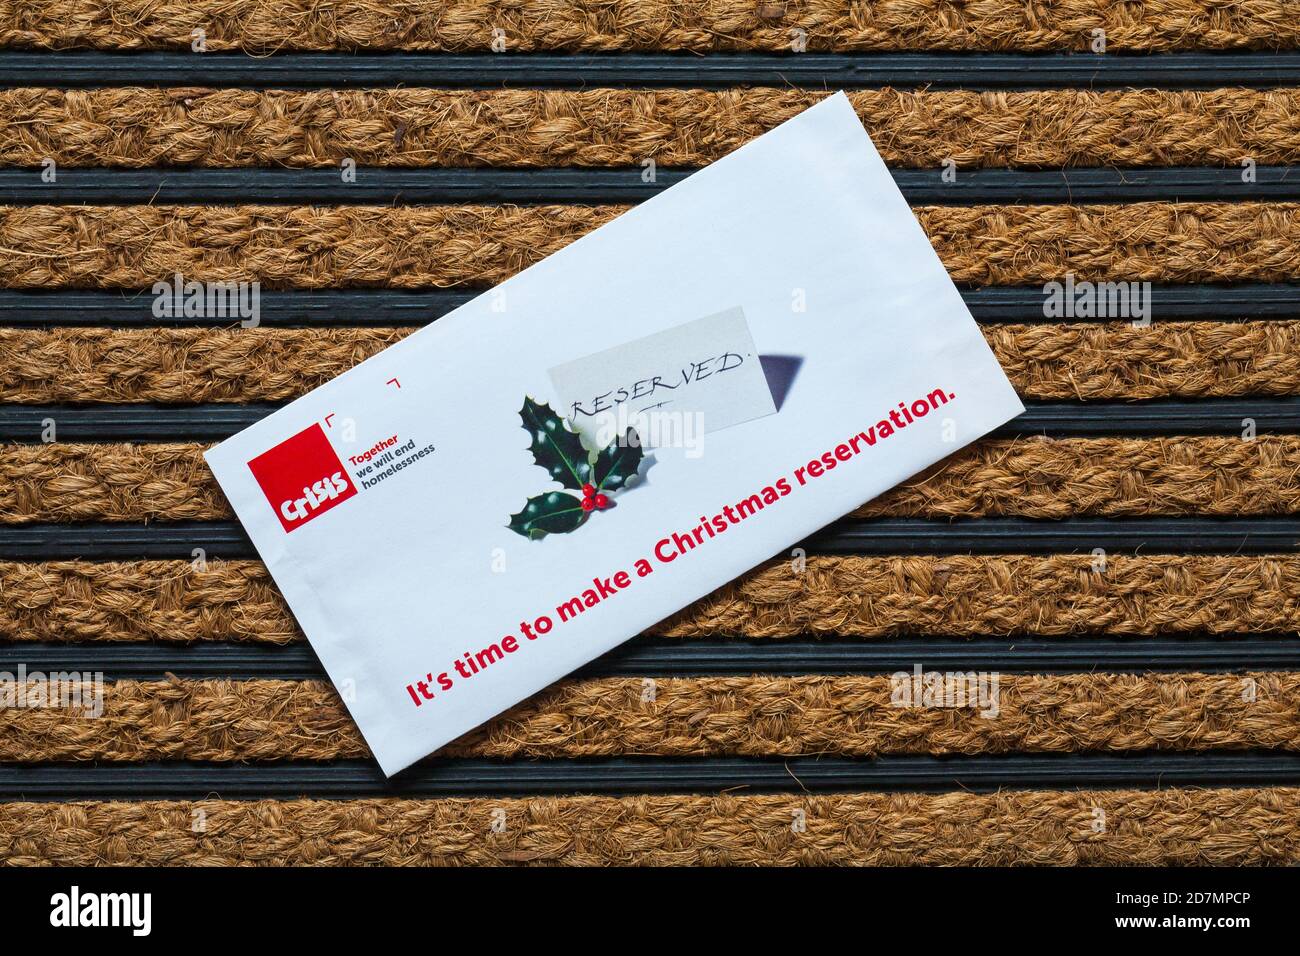 Post mail on doormat  - charity appeal, Crisis together we will end homelessness - it's time to make a Christmas reservation Stock Photo